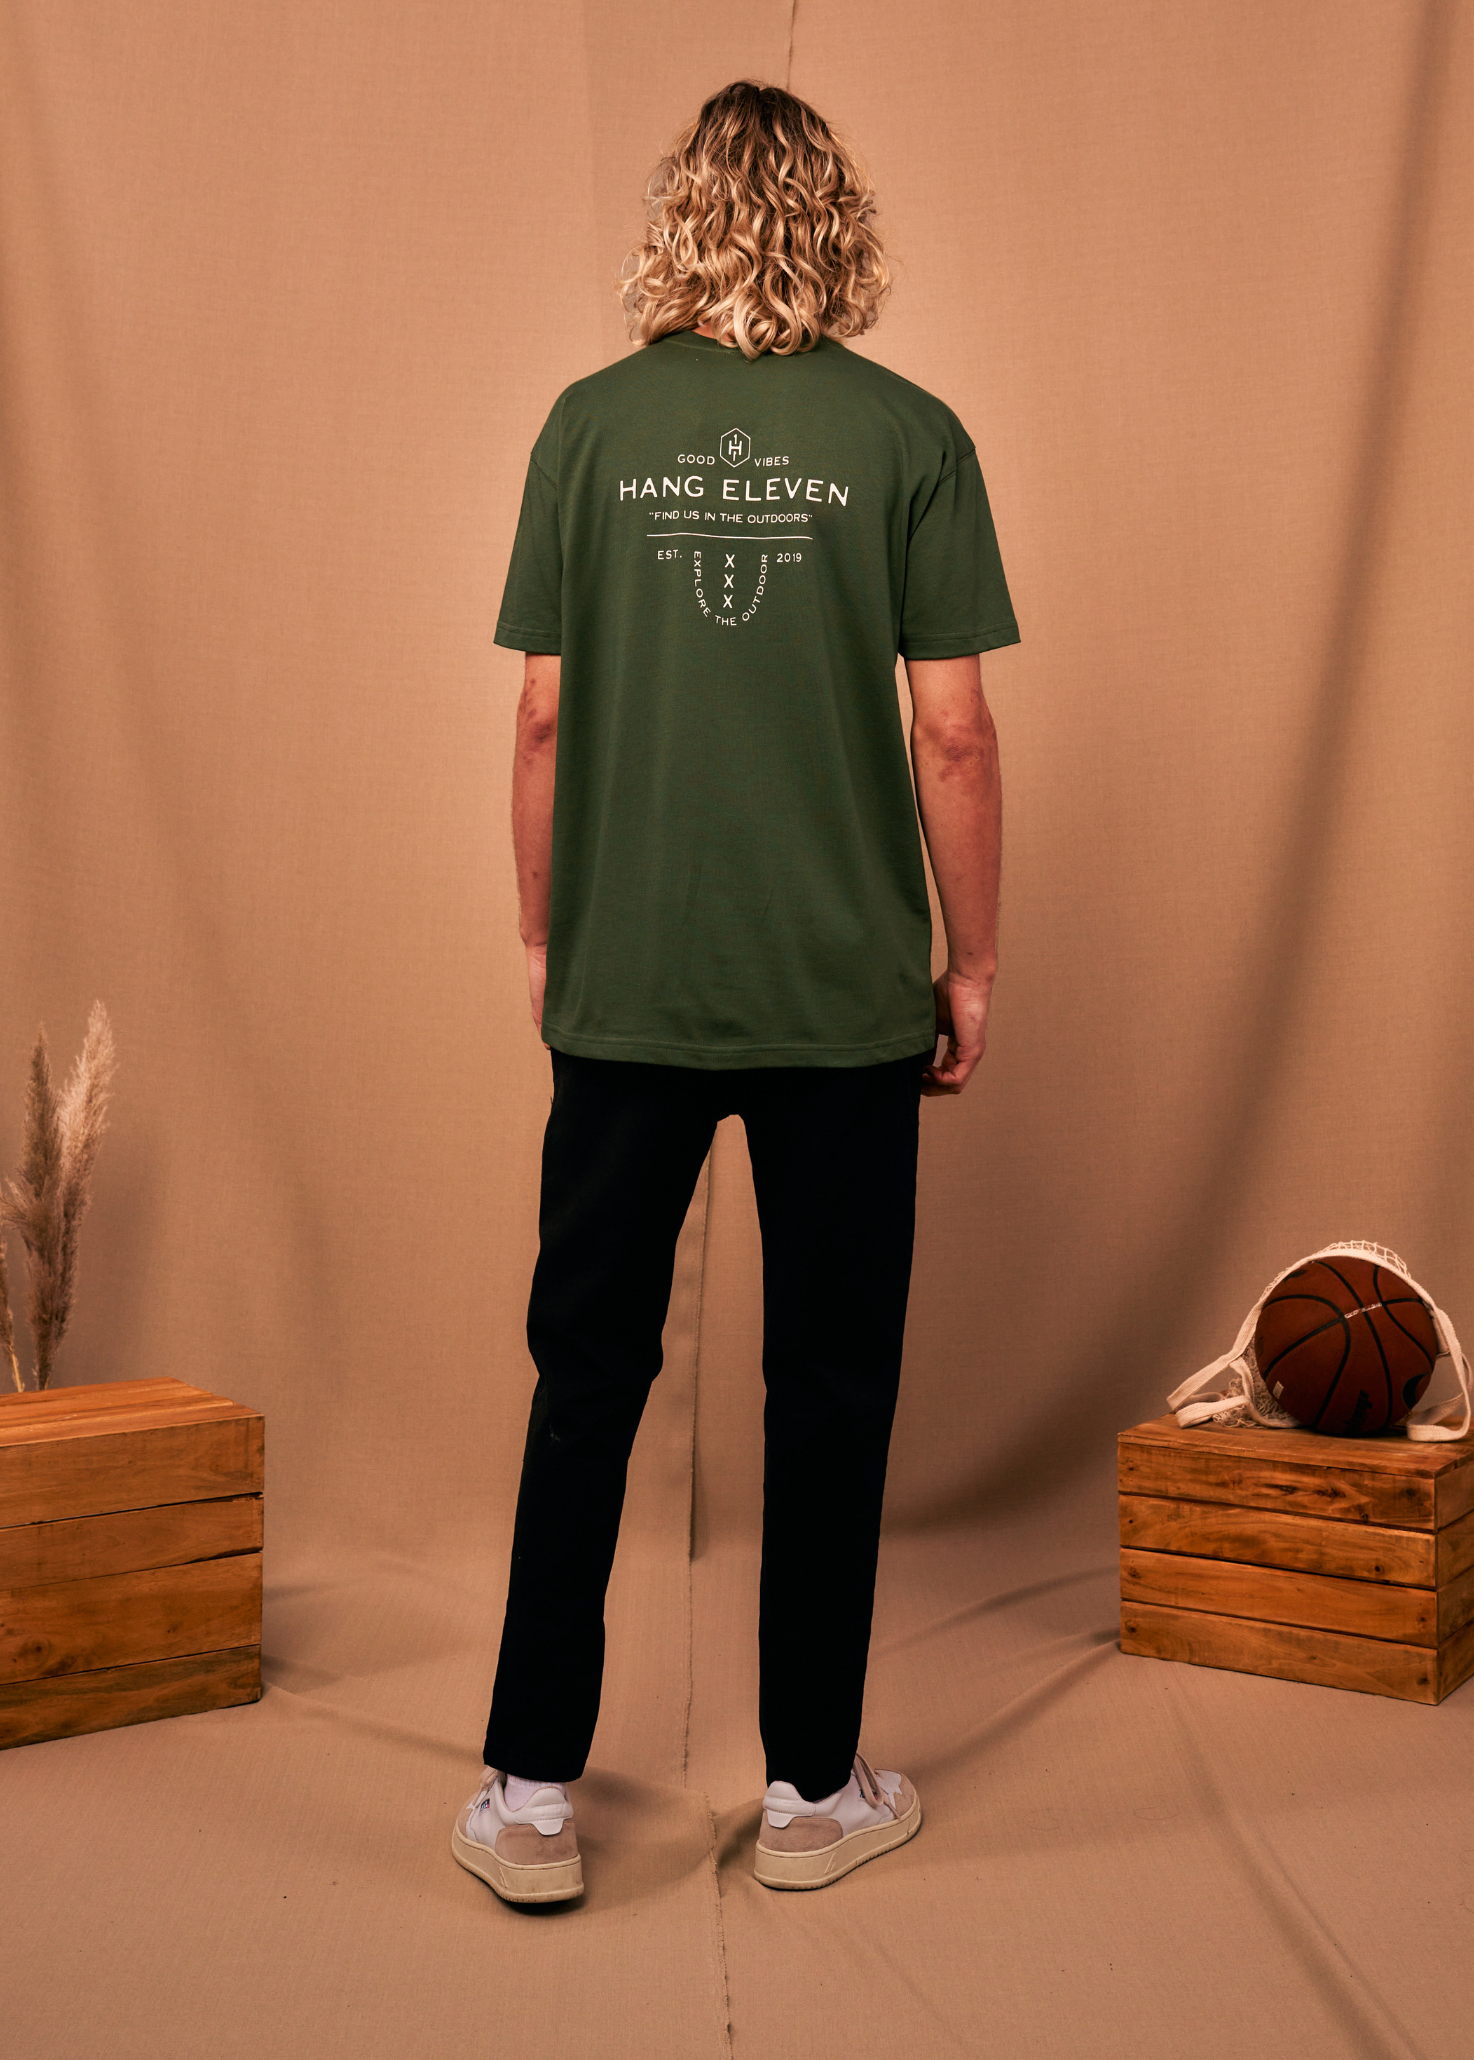 Essential Tee - Forest Green